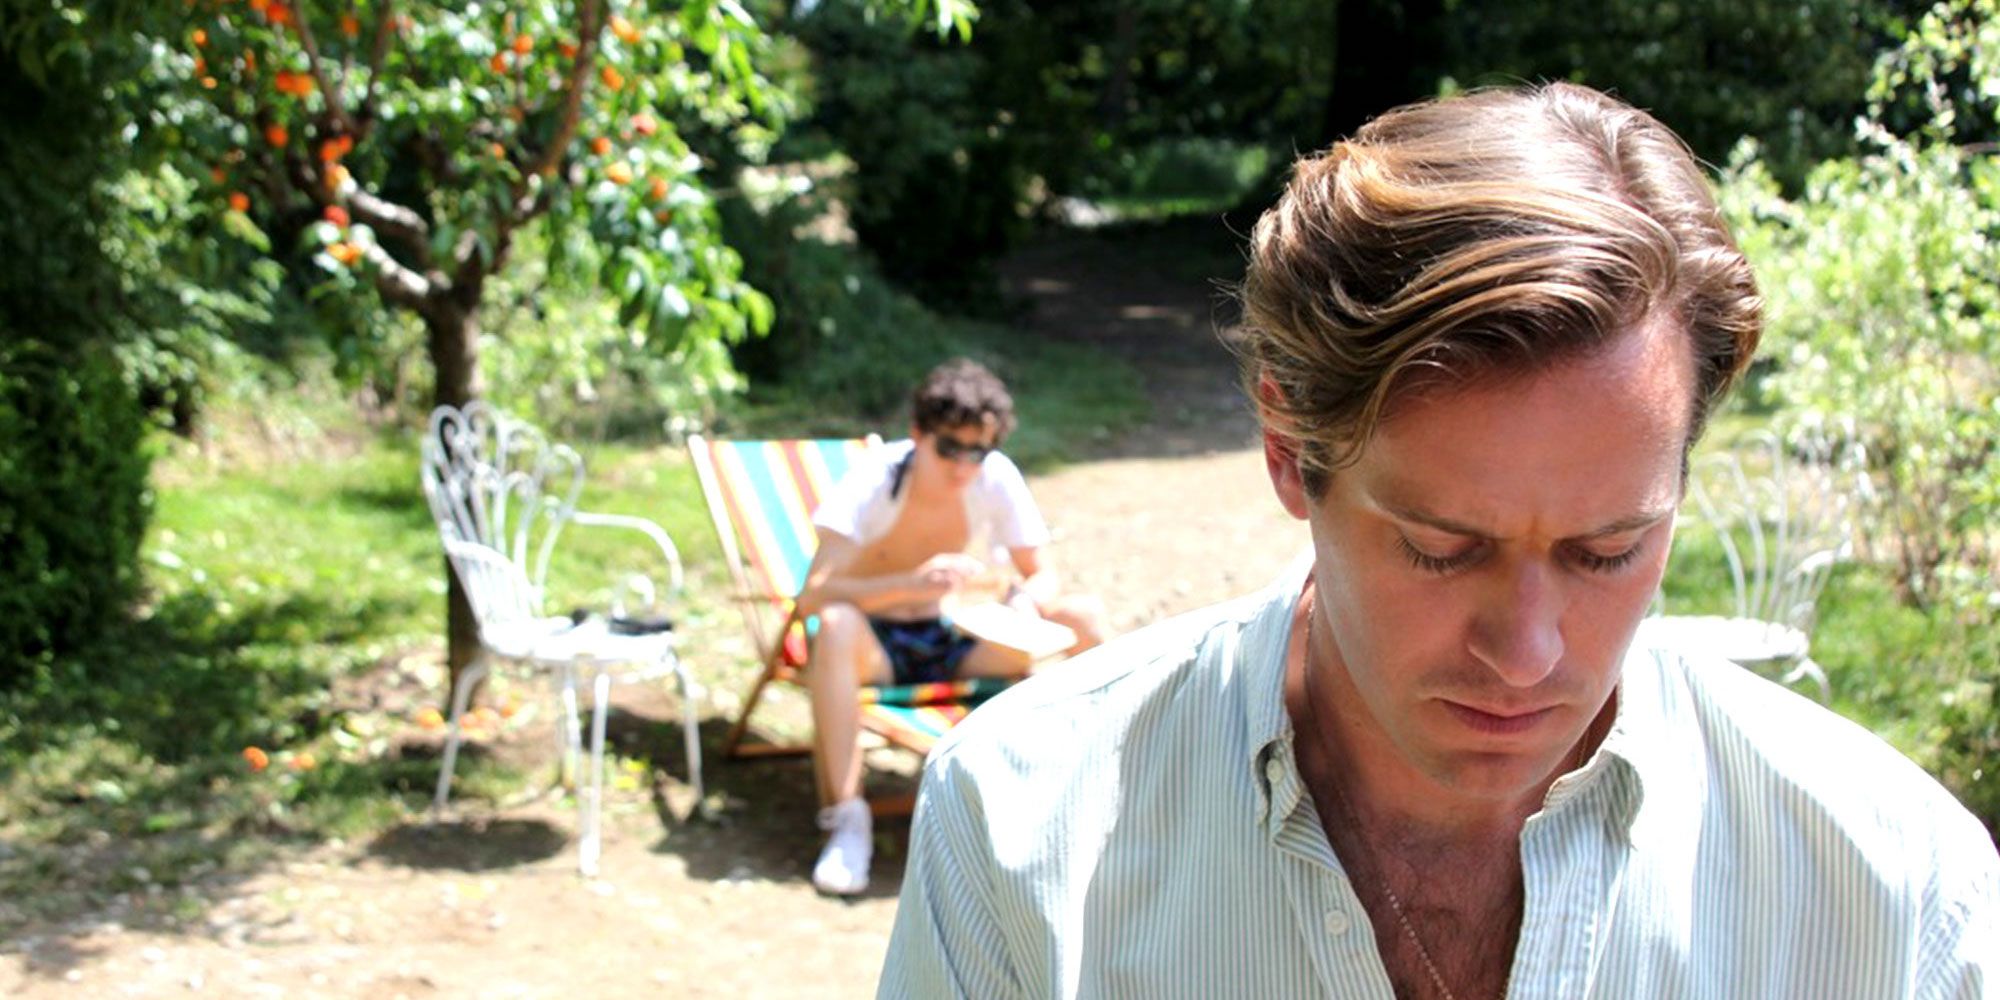 Call Me By Your Name Review A Beautiful Portrait of First Love